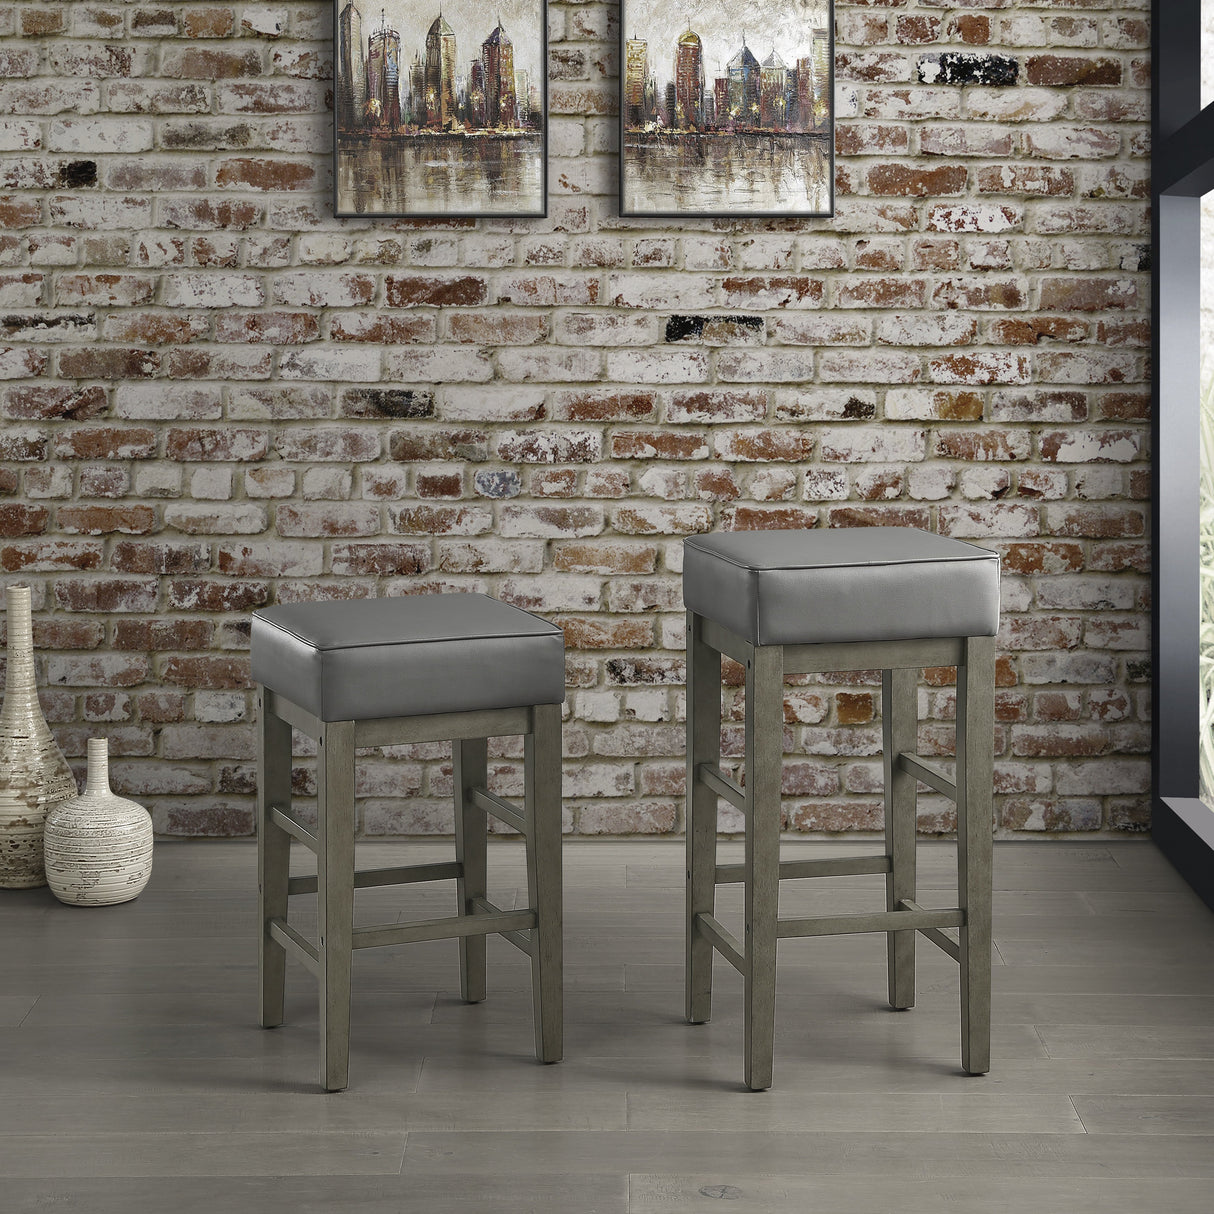 Pittsville Gray/Espresso Counter Height Stool, Set of 2